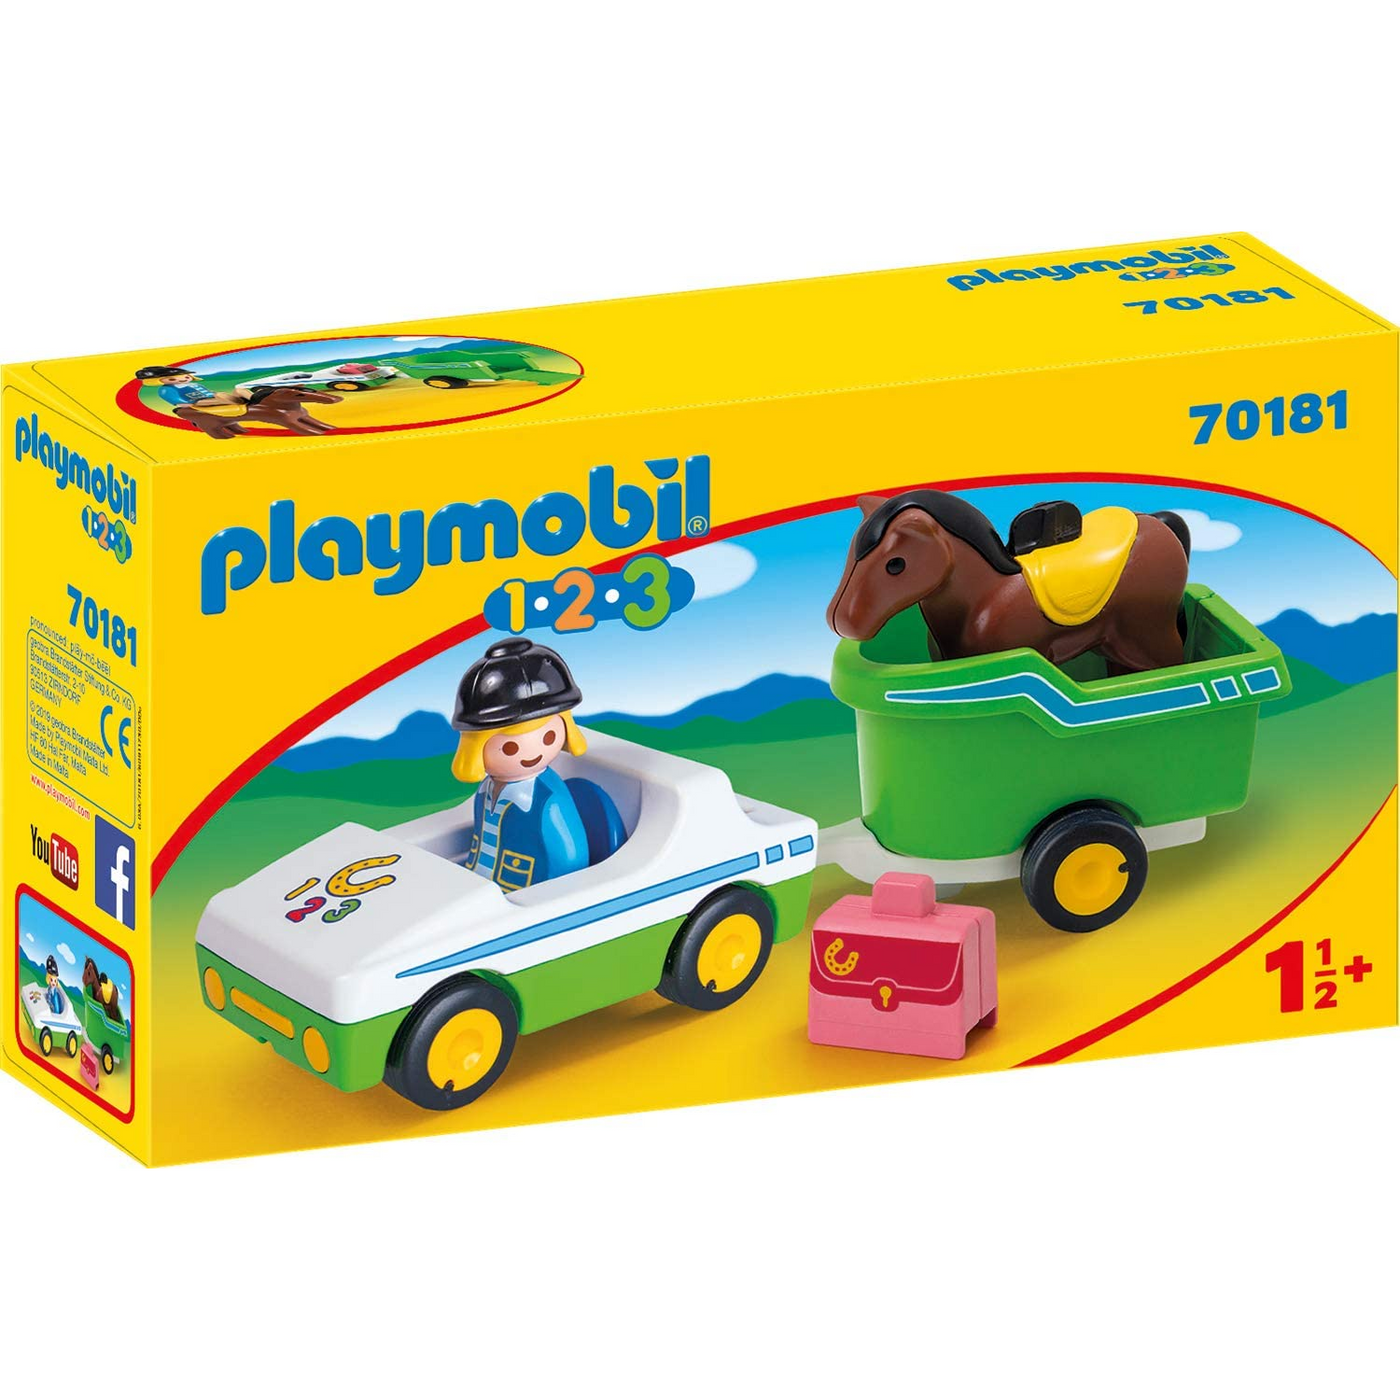 PLAYMOBIL Tractor with Trailer Play Vehicle 